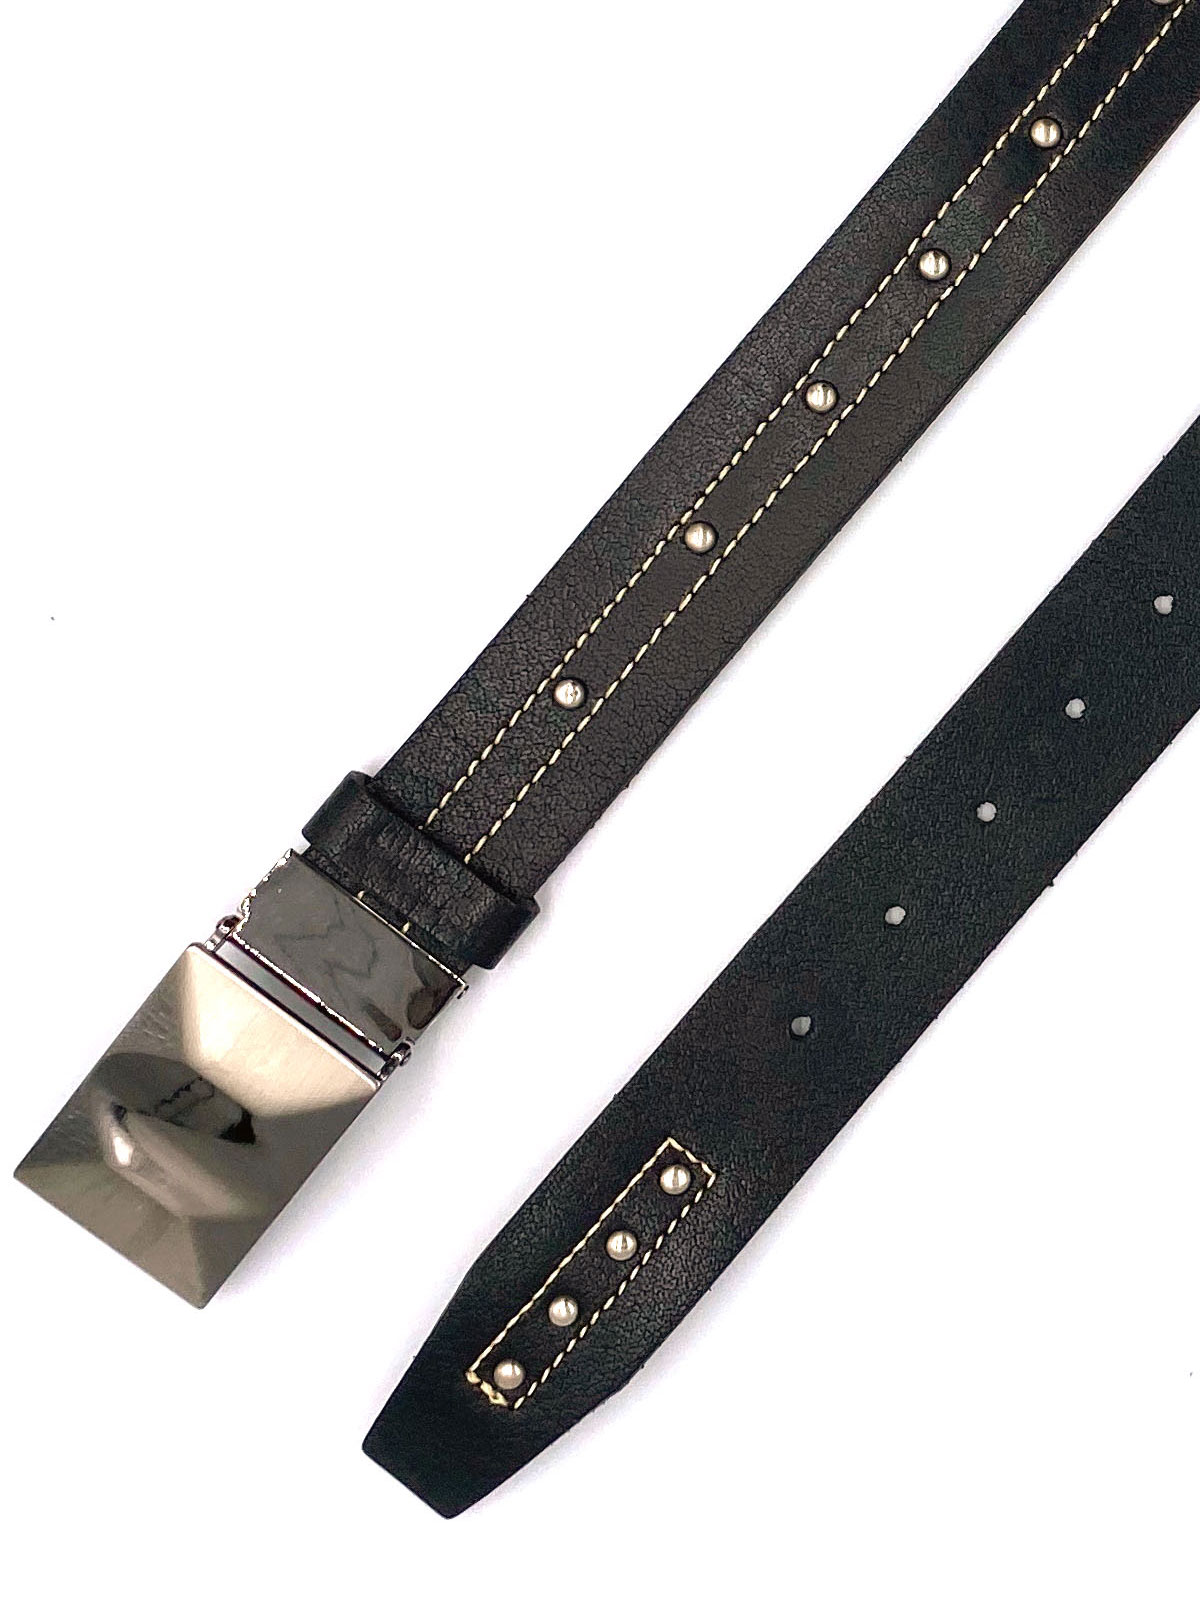 Sports belt with metal plate - 10405 - € 10.12 img3